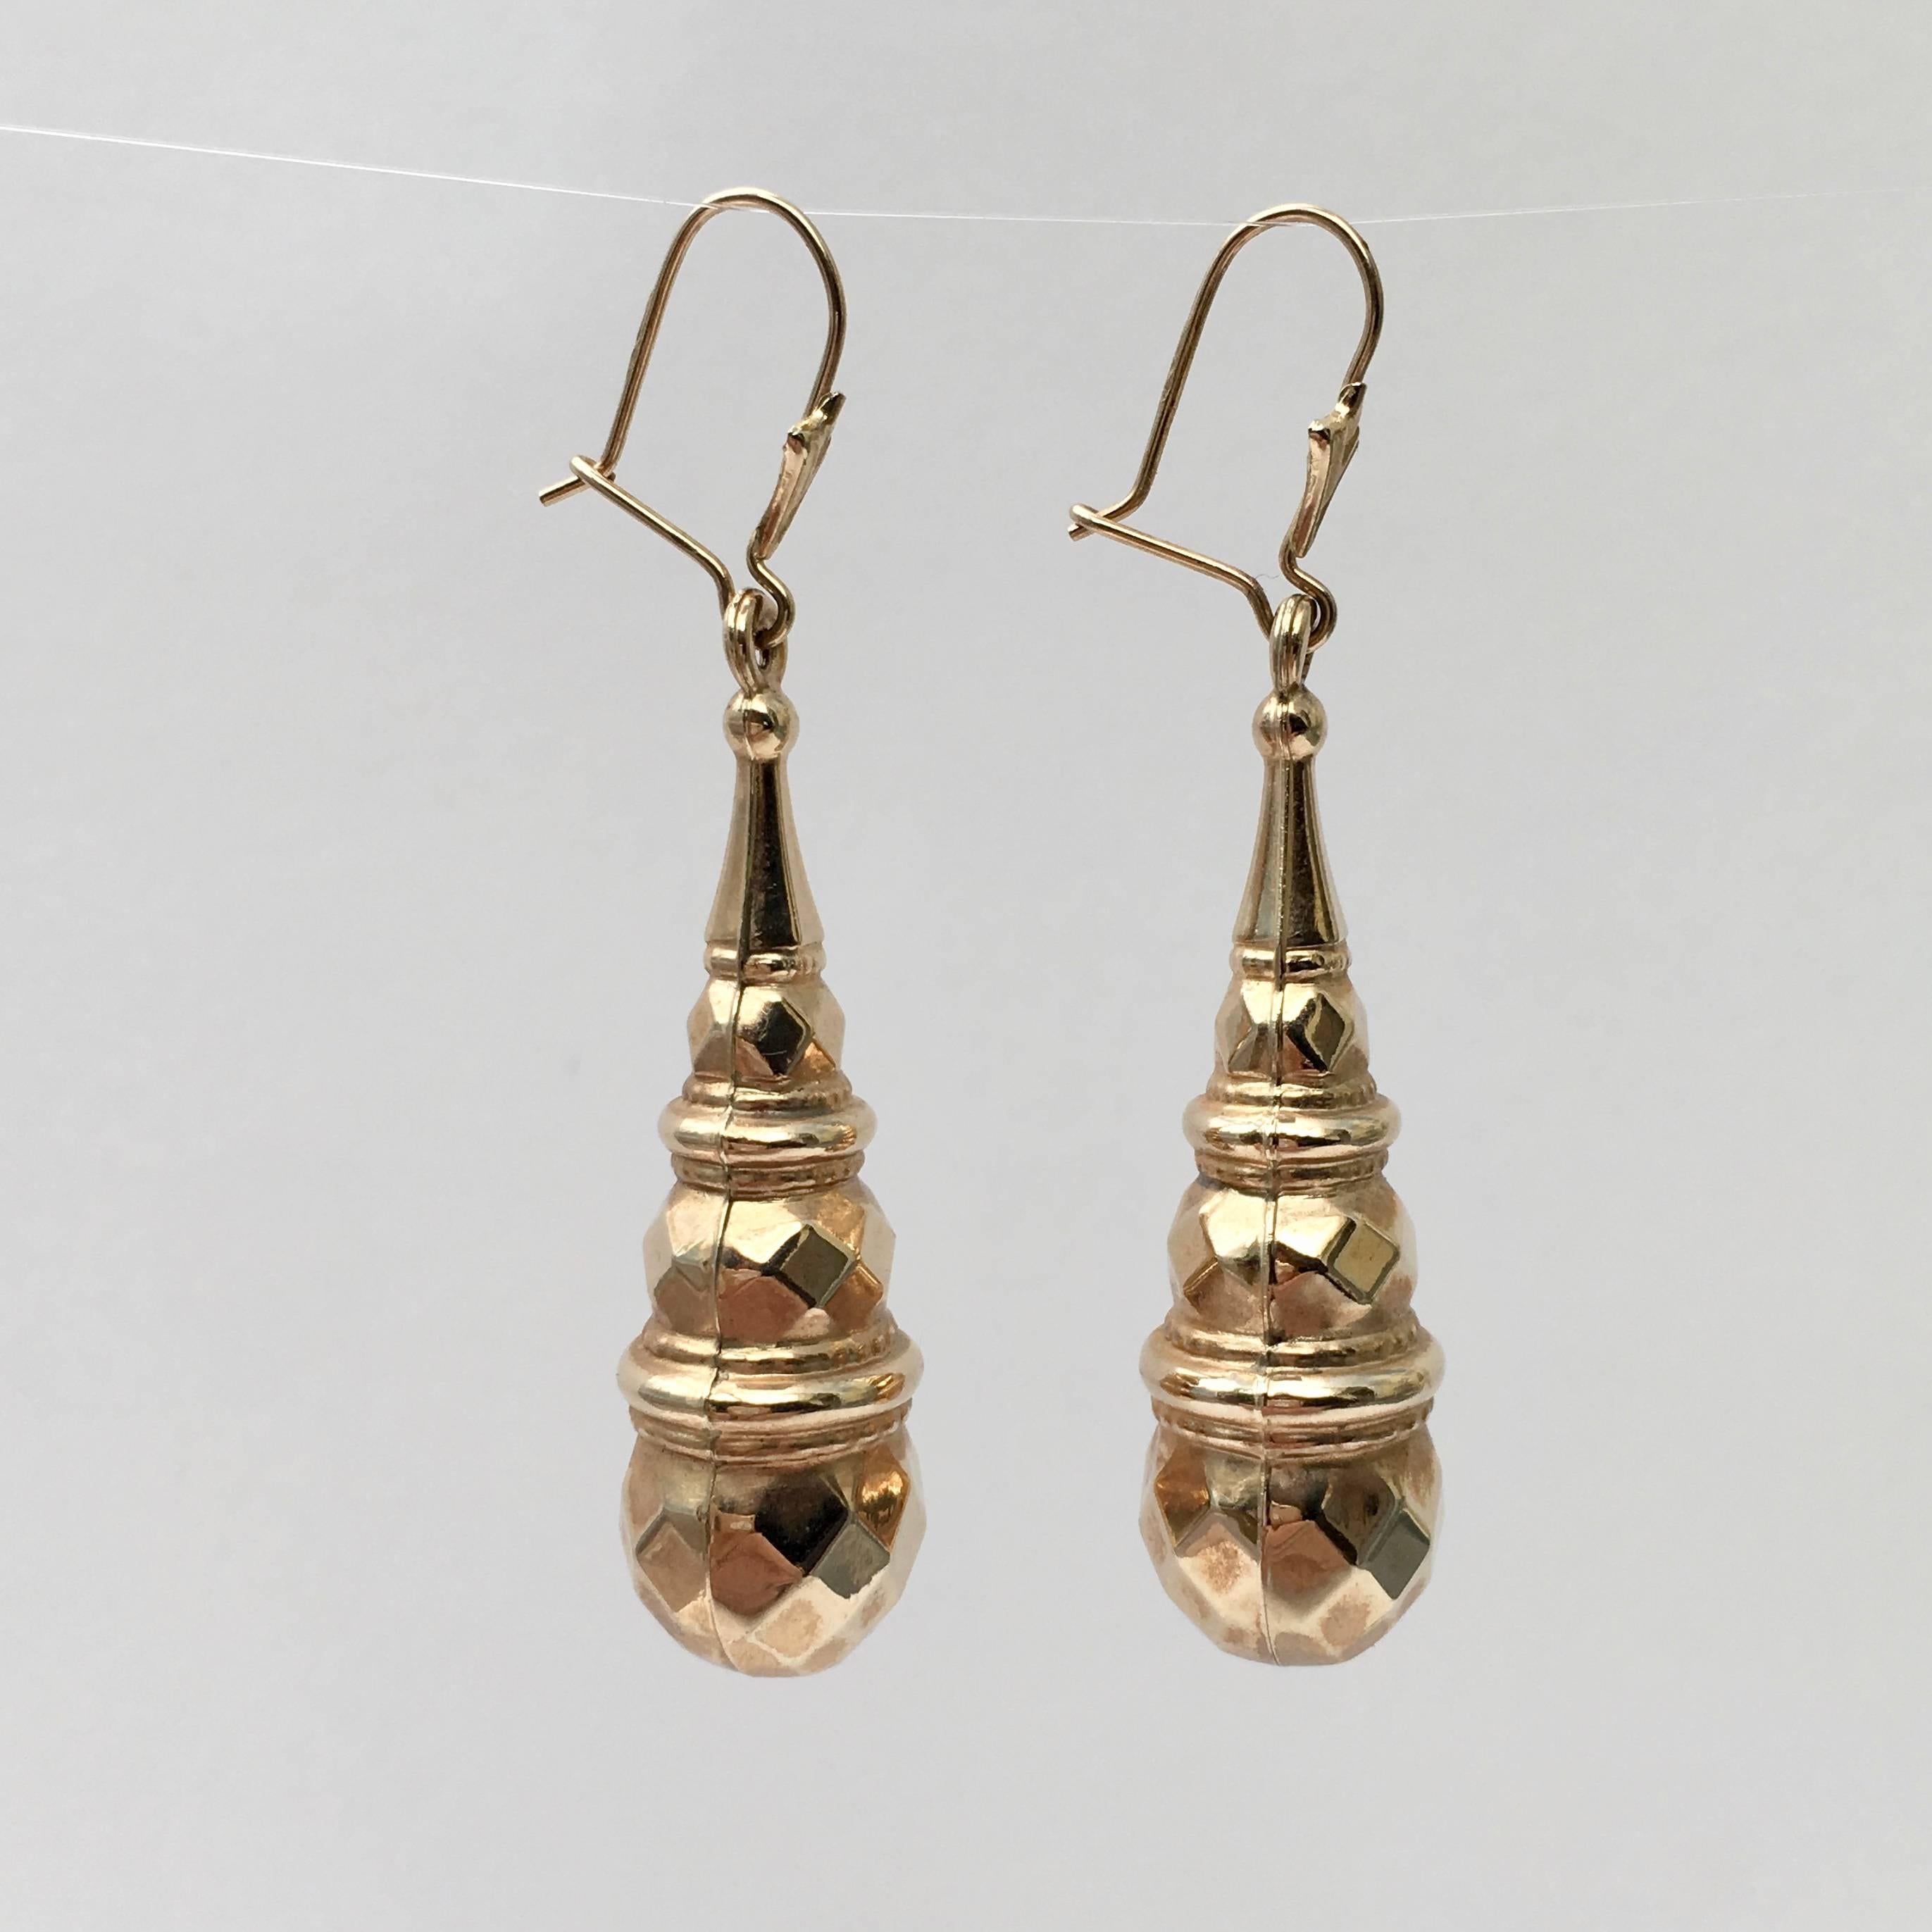 A striking pair of 9ct gold torpedo-shaped drop earrings. The moulded drops are hollow, making them lightweight and extremely wearable. The style has an air of the mid-Victorian era about it, though we think they are probably later. The drops